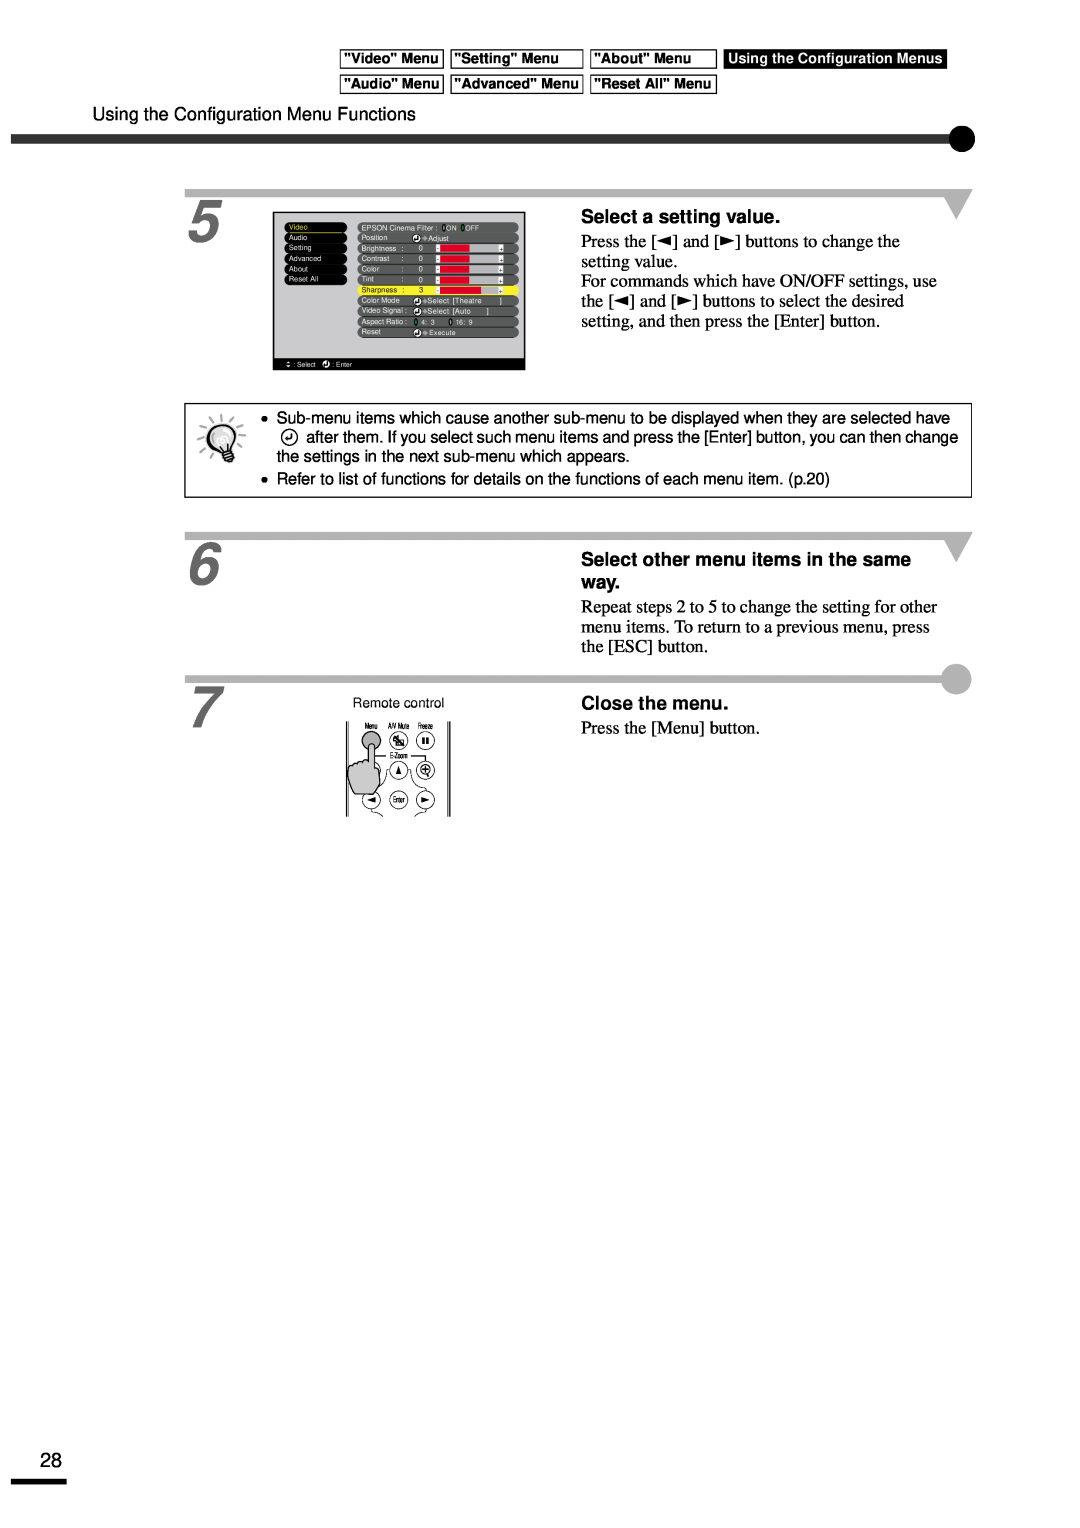 Epson EMP-30 manual Select a setting value, Select other menu items in the same way, Close the menu 